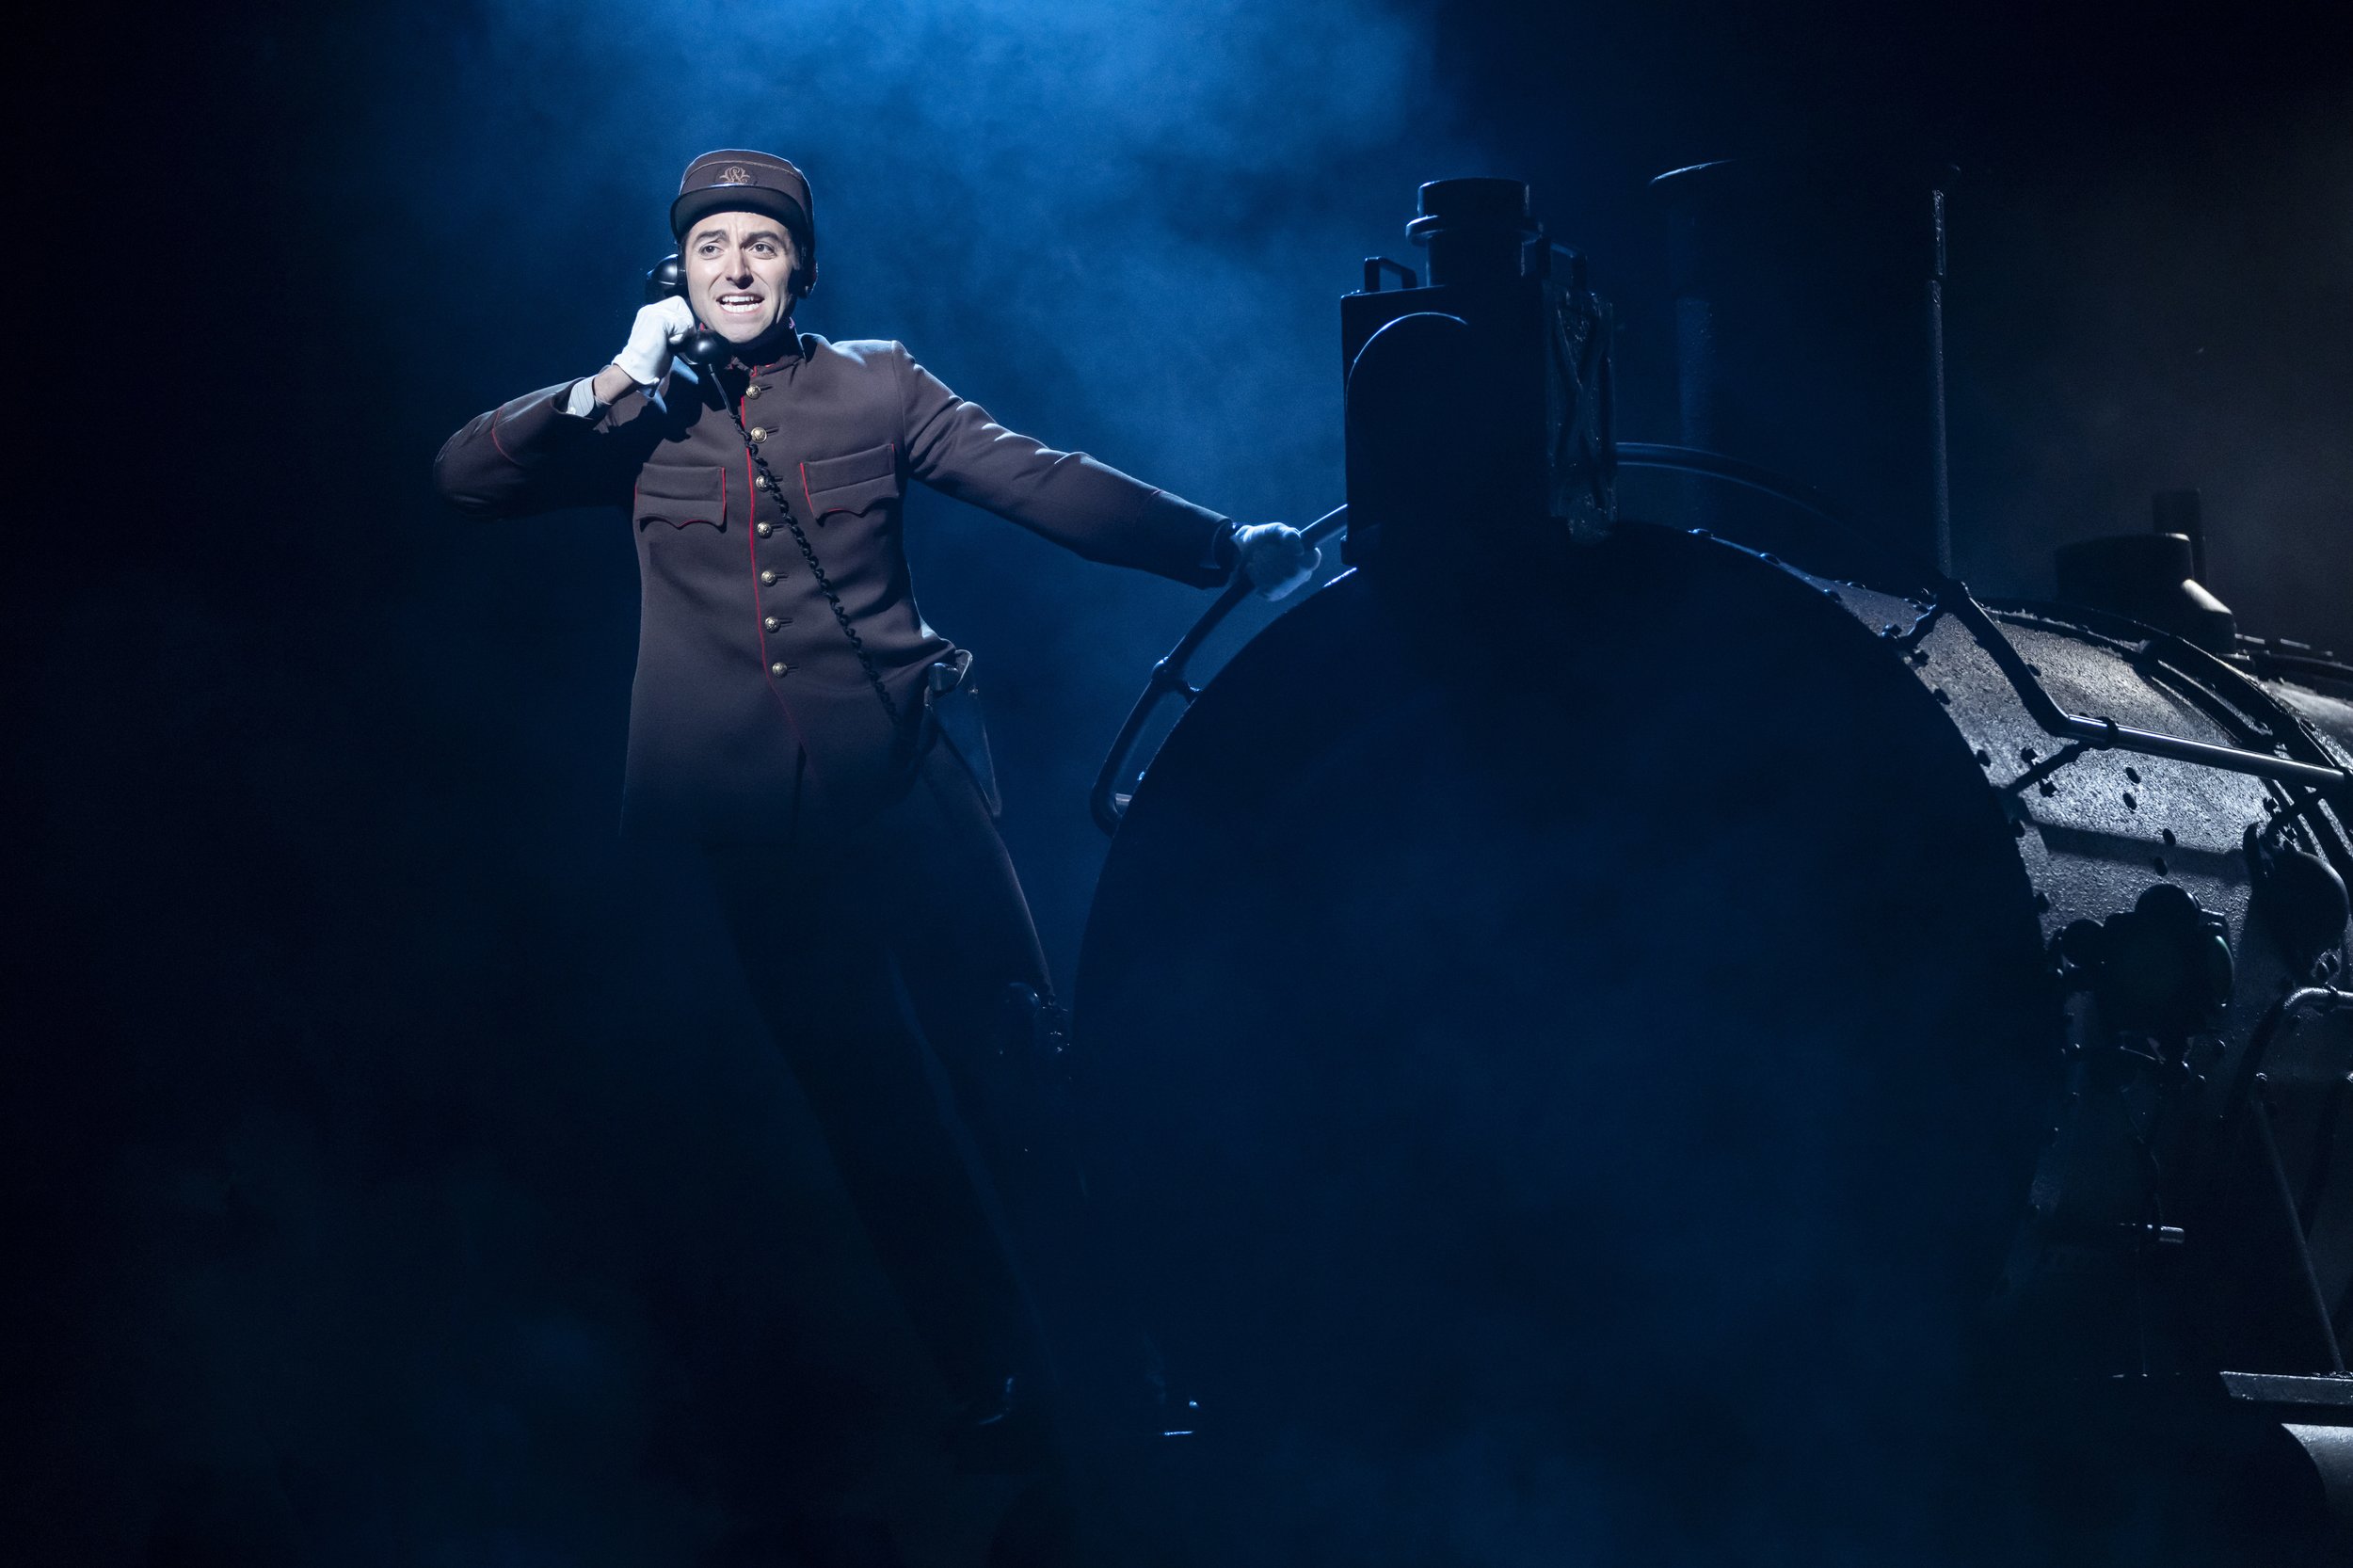 Marc Antolin as Michel the Conductor in Murder on the Orient Express at Chichester Festival Theatre